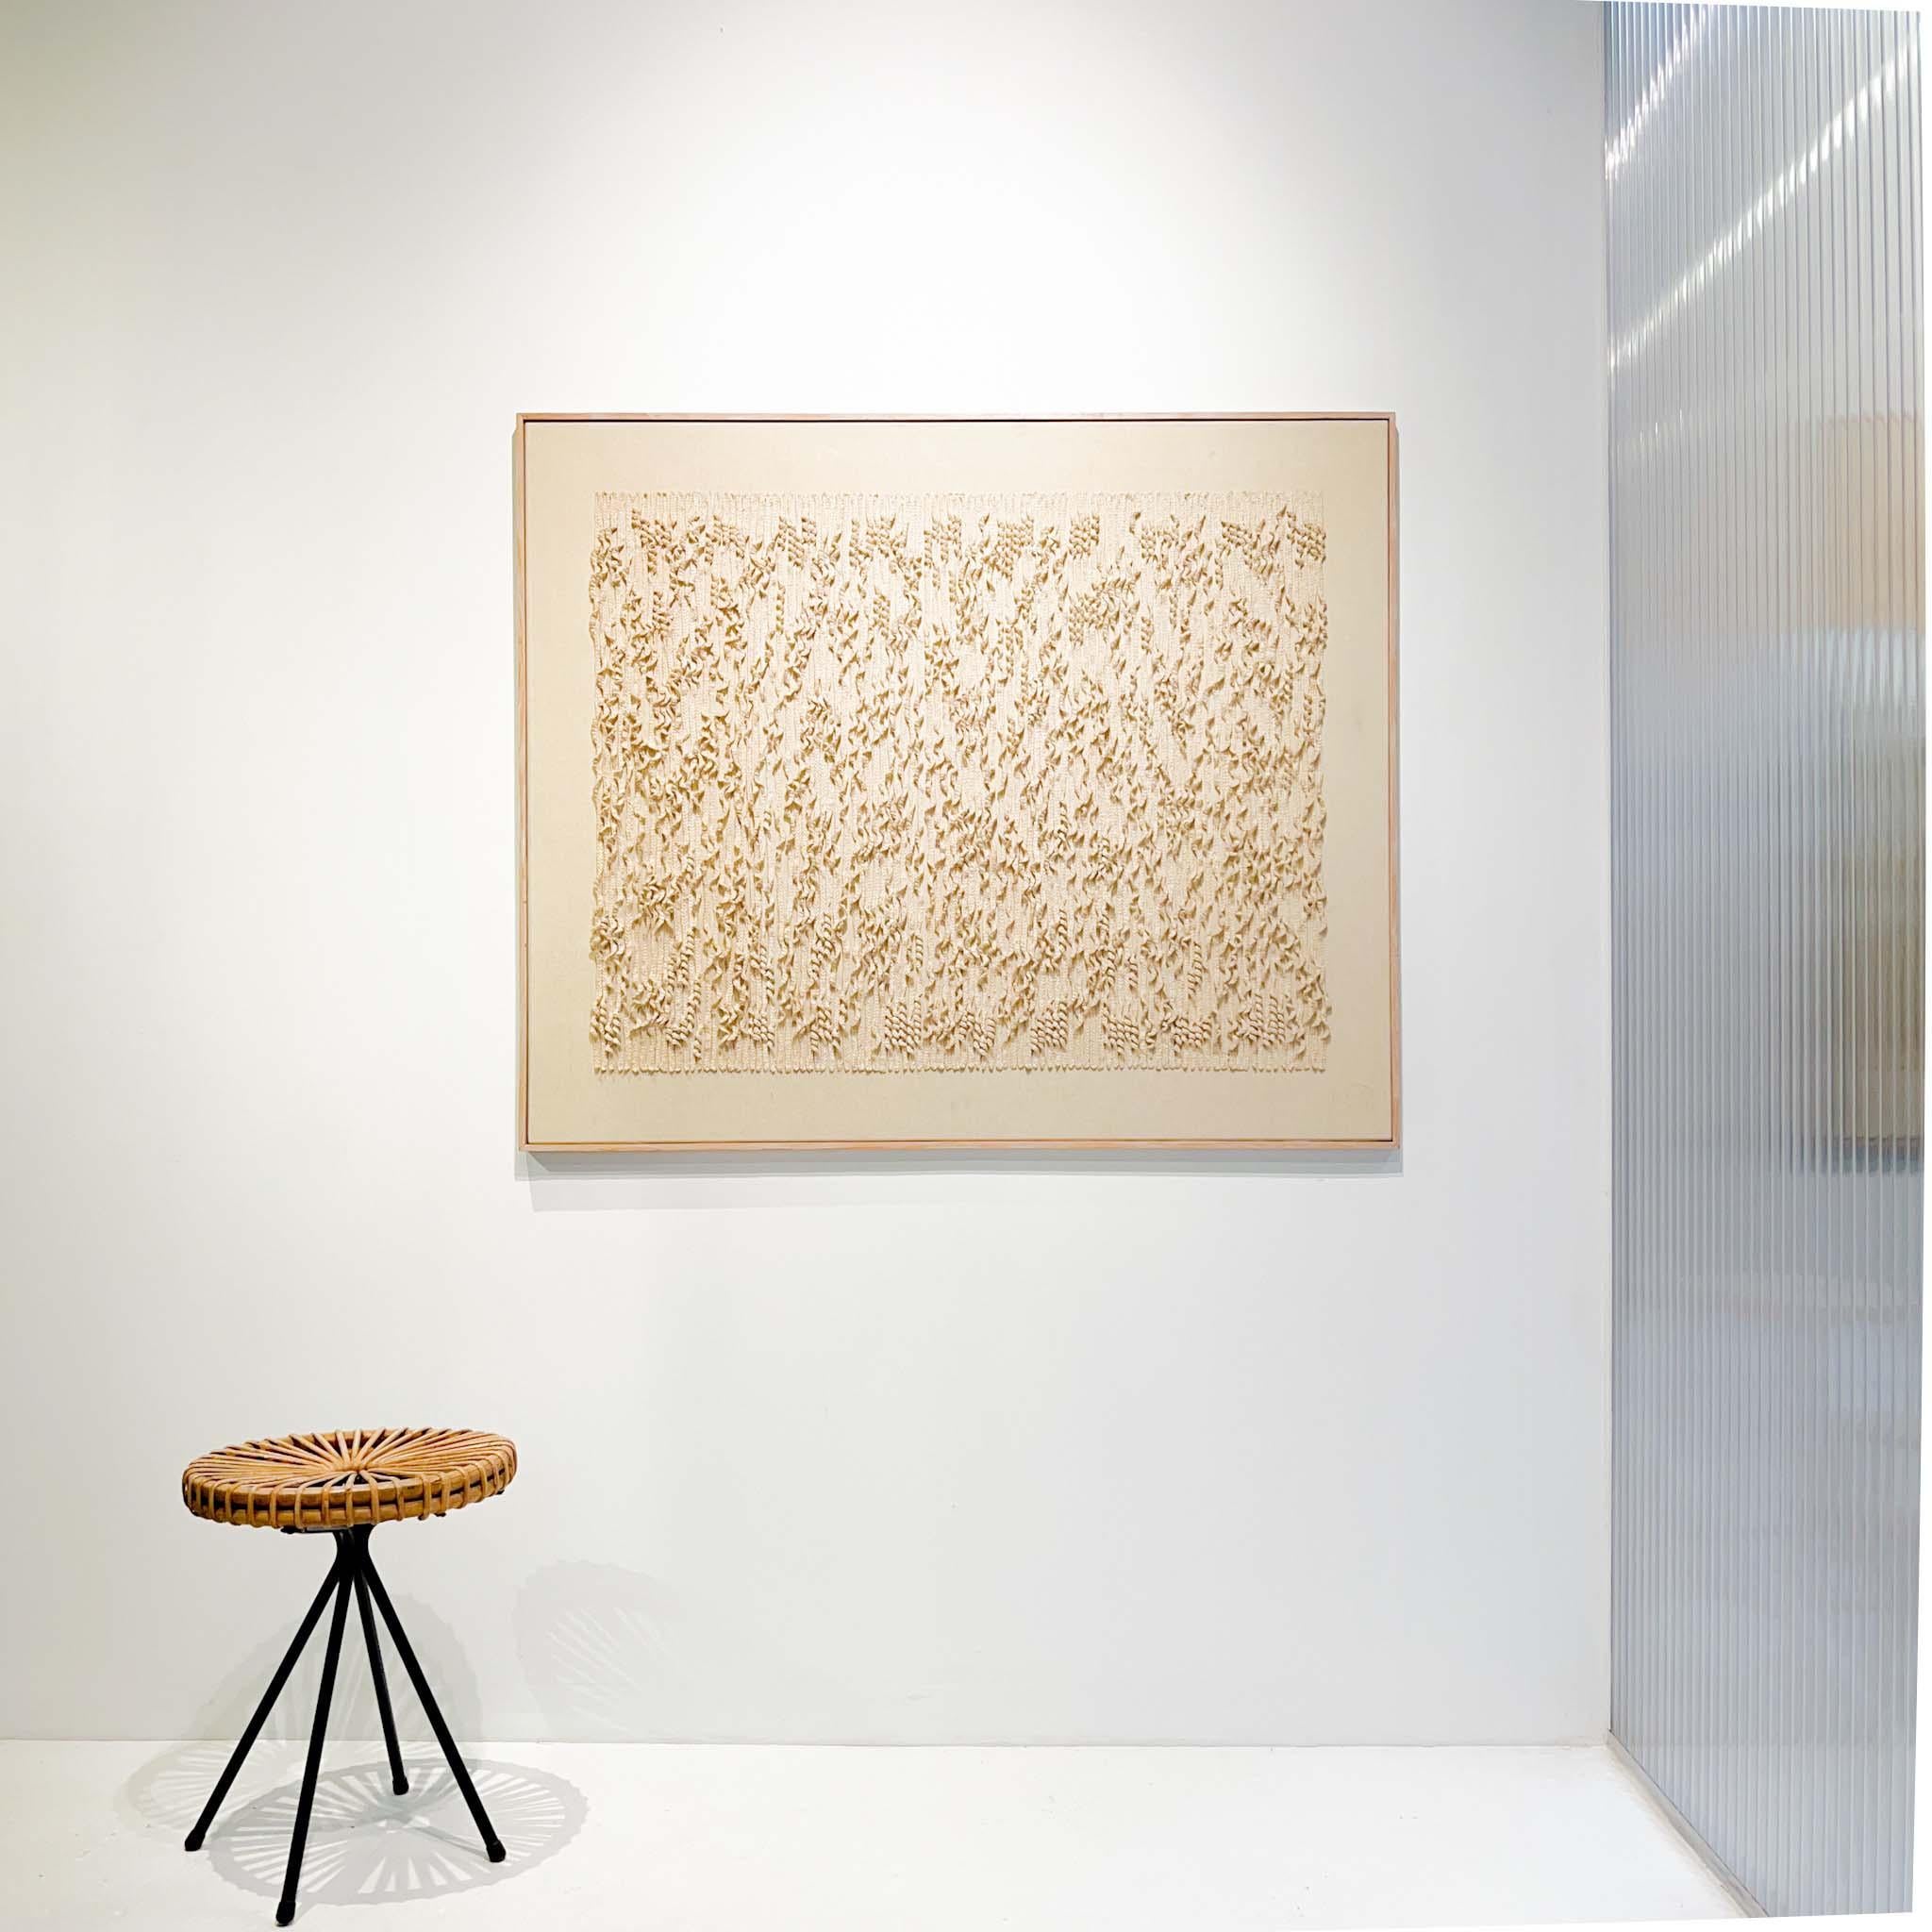 Huge framed minimalist ZERO artwork in textile by a known Dutch artist, signed and dated.

With limited use of color and material this piece creates an interesting play with light and shadow, linking it to the Minimalist ZERO. 
Zero was an artist